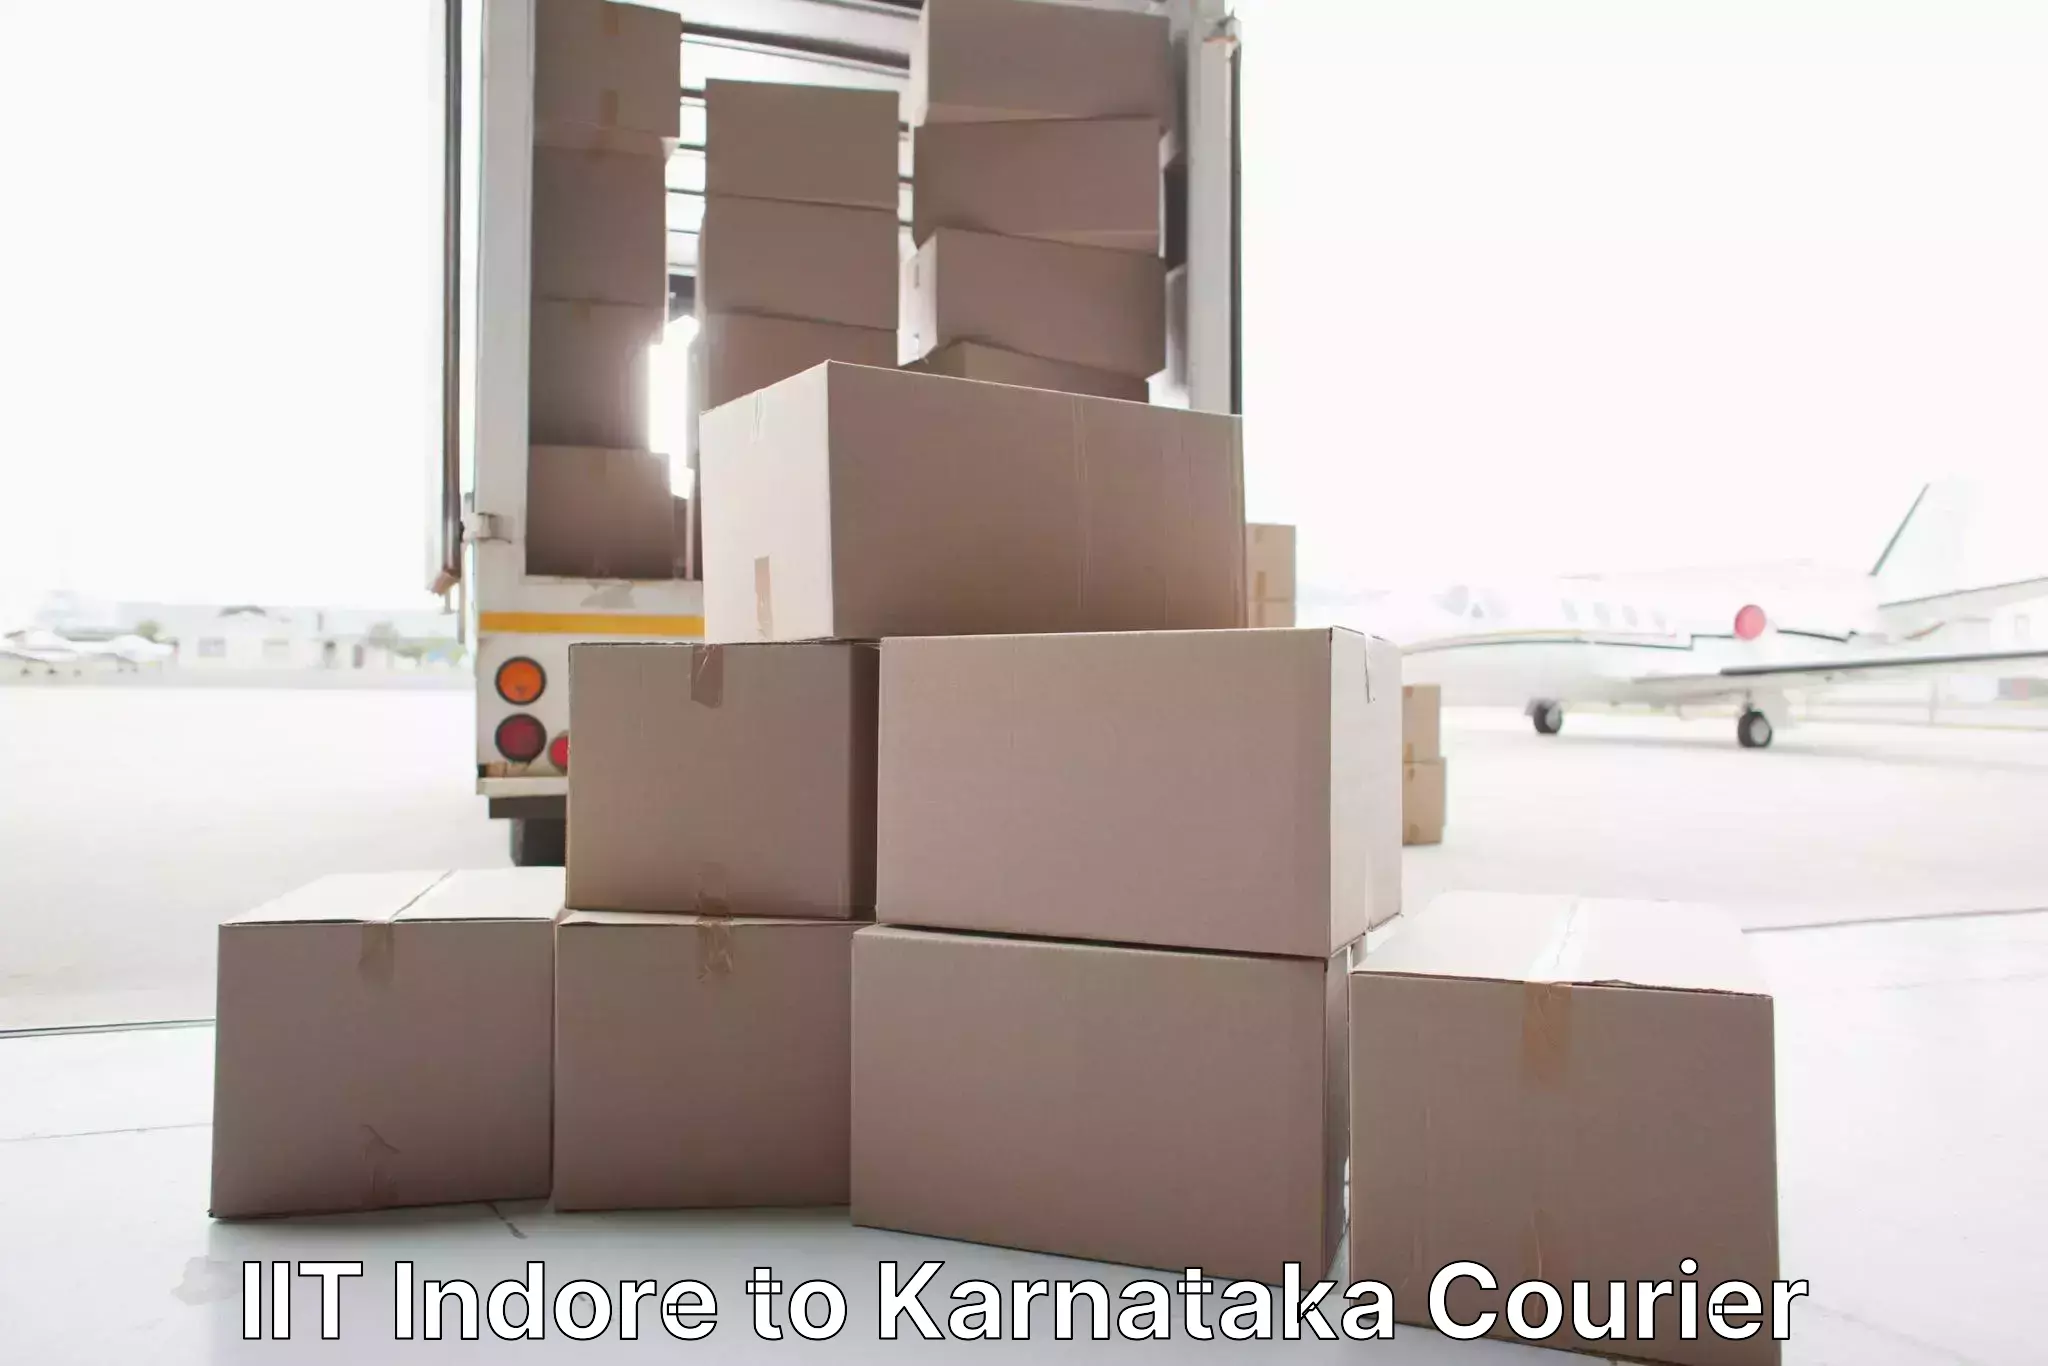 Quality relocation assistance in IIT Indore to Karnataka